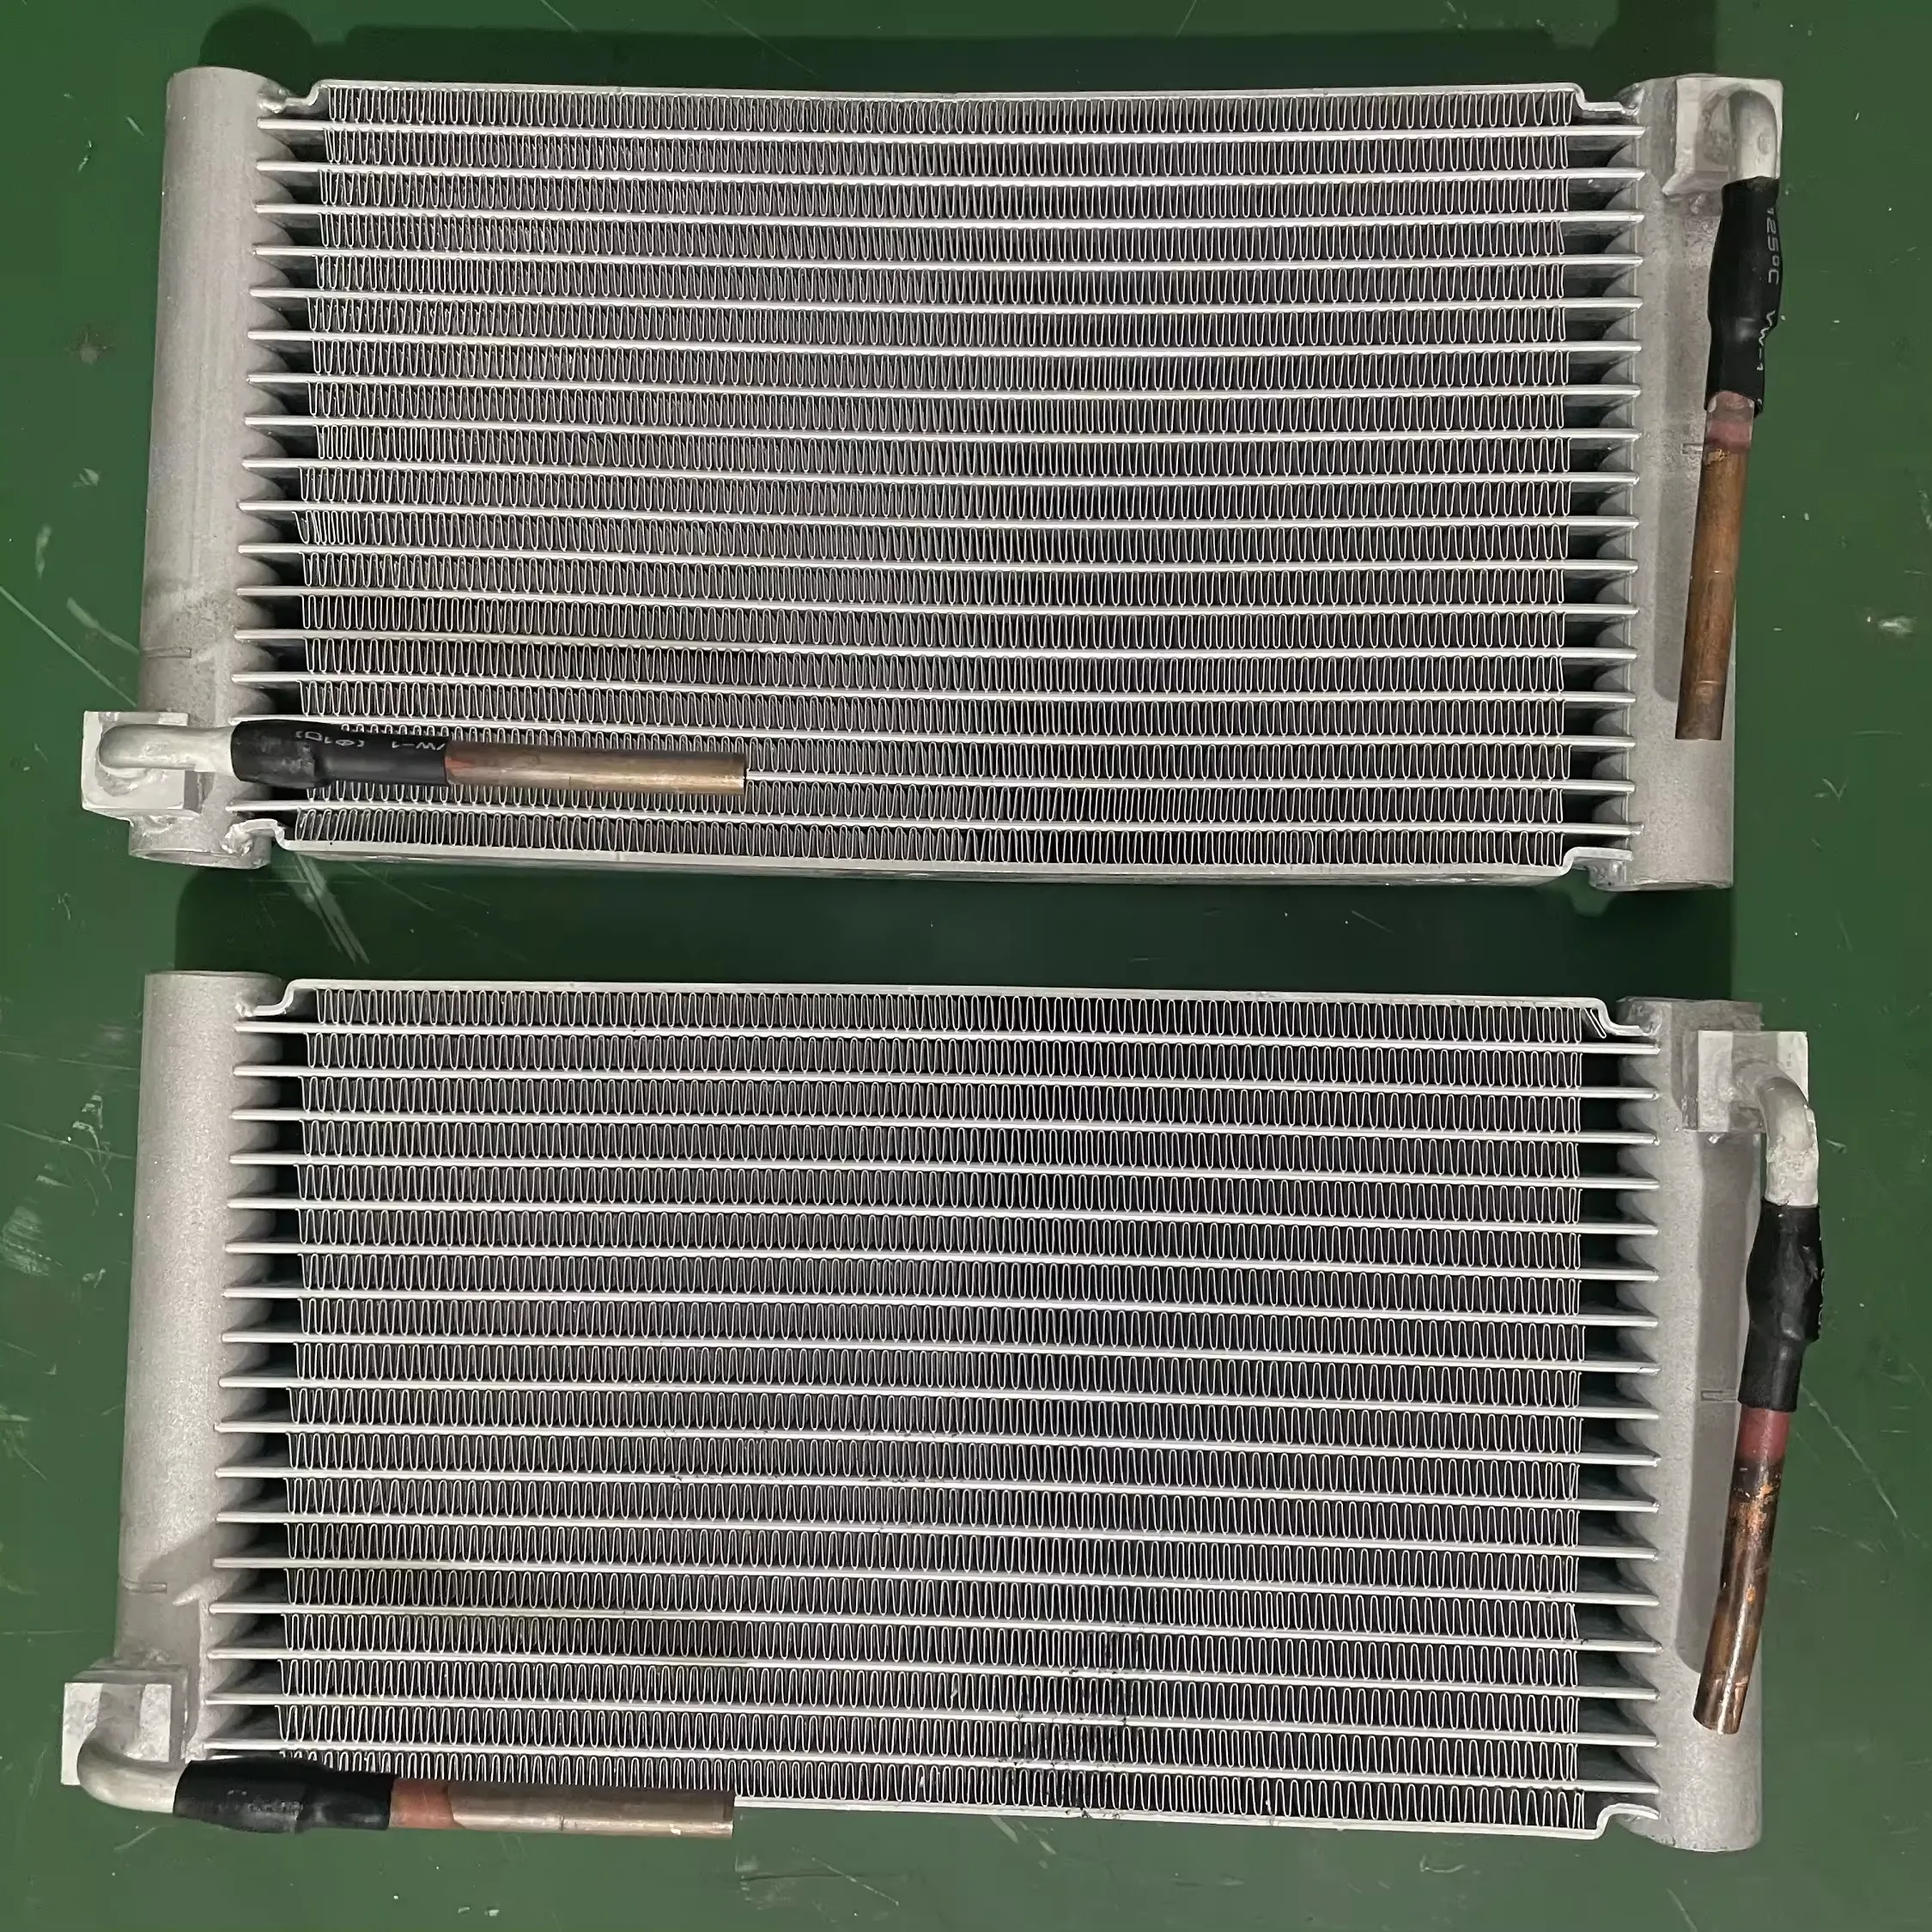 Top quality manufacture well made radiator microchannel aluminum alloy heat exchanger water cooling cycle water cooling drainage